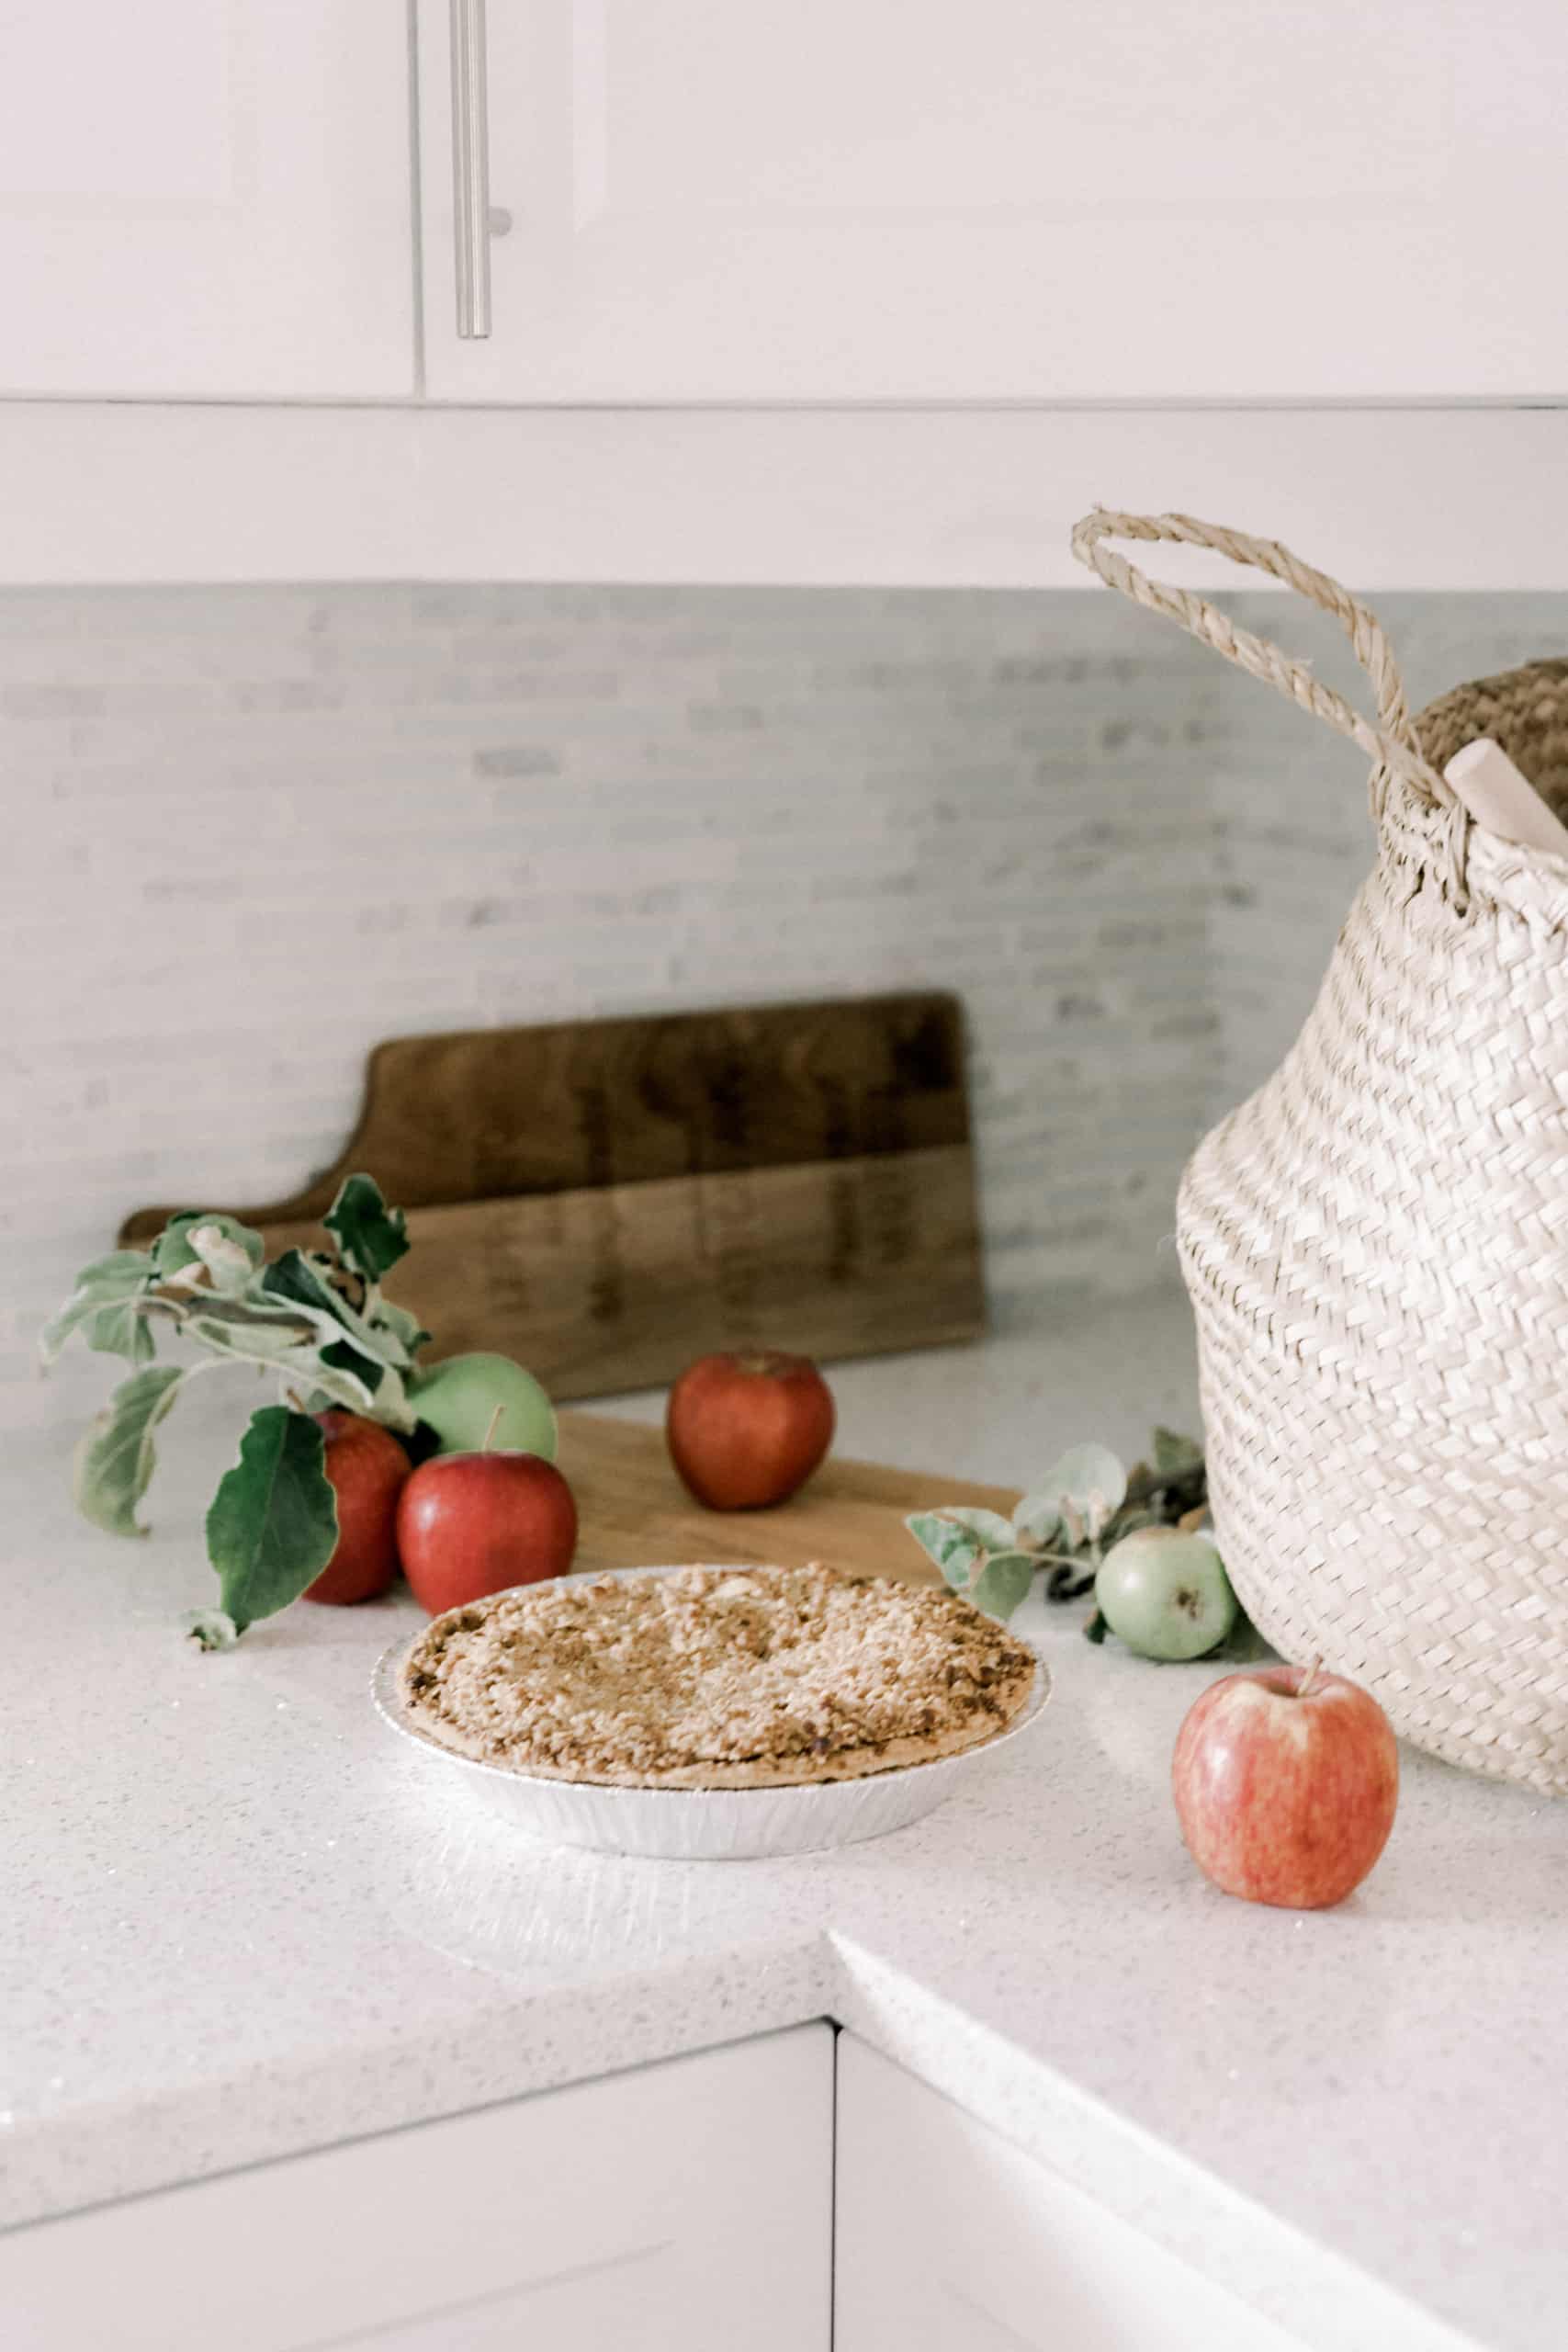 view of a kitchen counter with an apple pie, apples strewn about, a wooden cutting board in he background, and a market basket